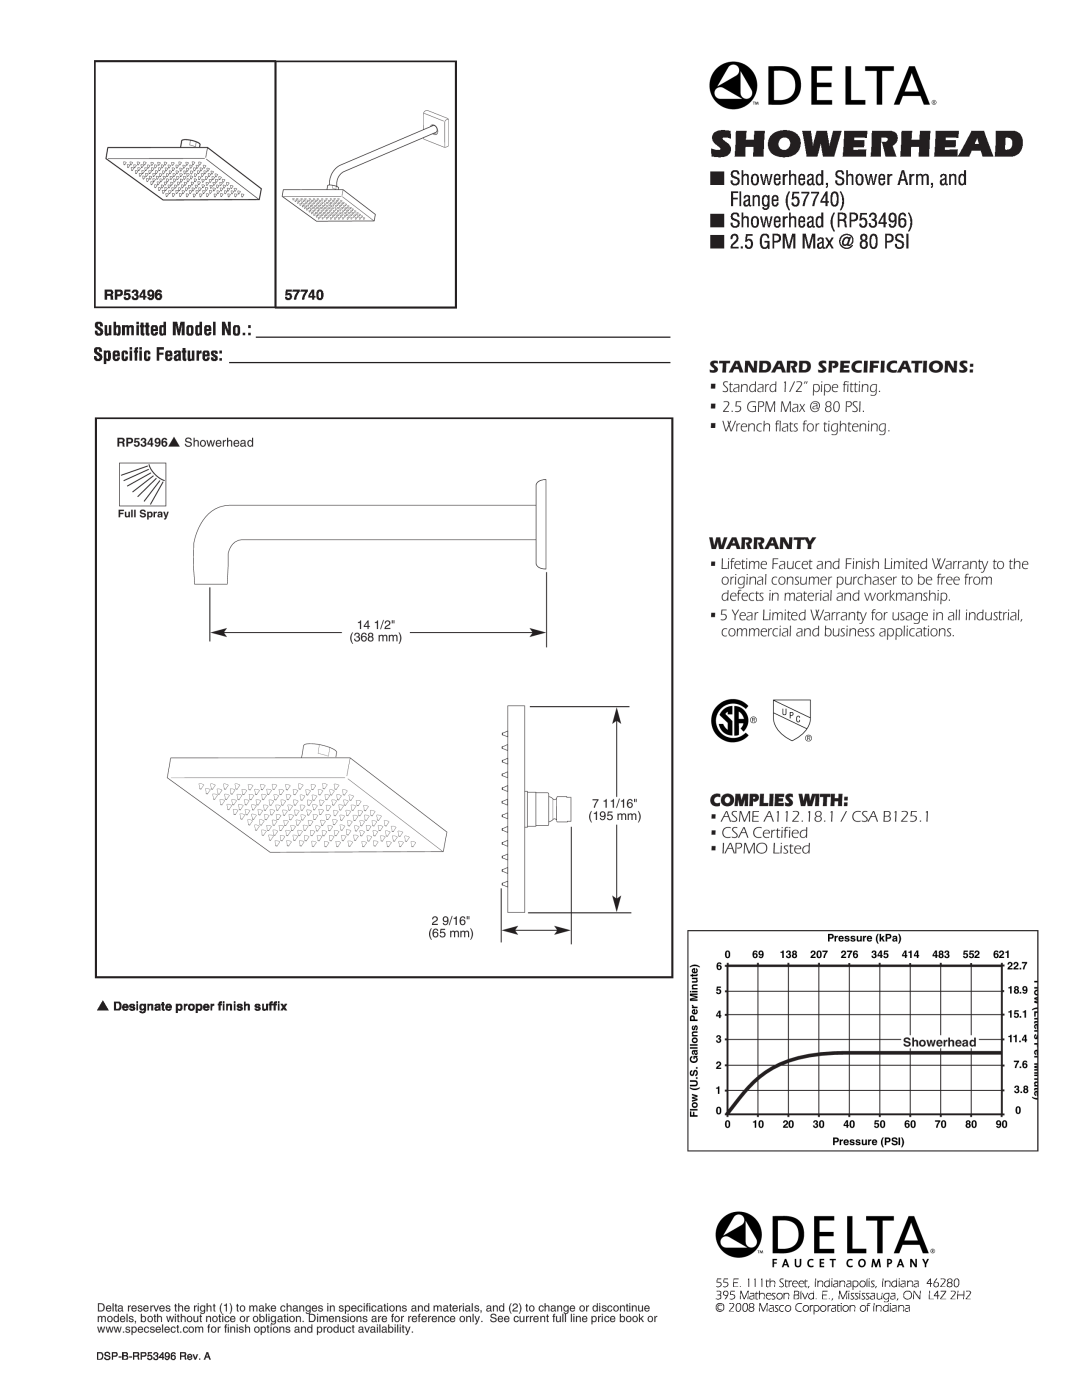 Delta specifications Showerhead, Shower Arm, and Flange Showerhead RP53496, GPM Max @ 80 PSI, Submitted Model No 